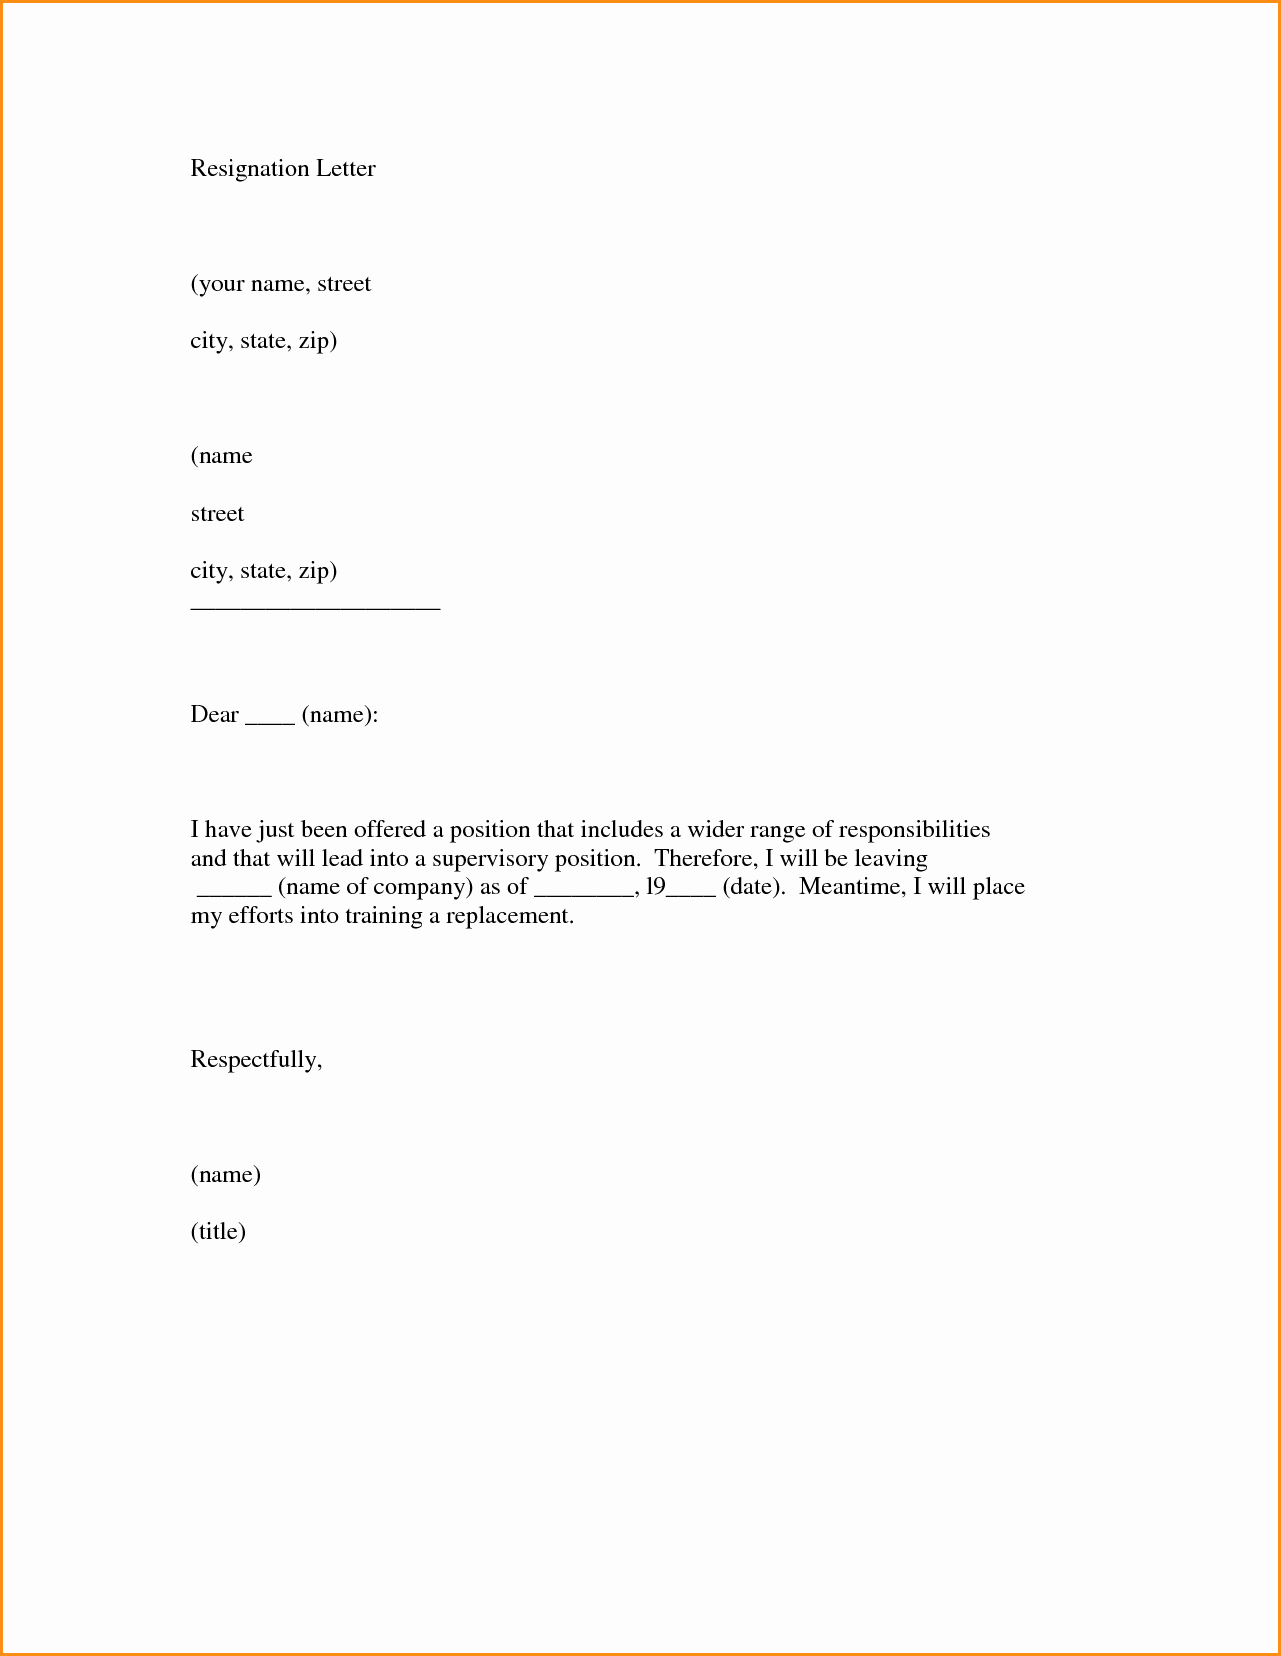 Letter Of Resignation Template Download Fresh 10 Good Letters Of Resignation